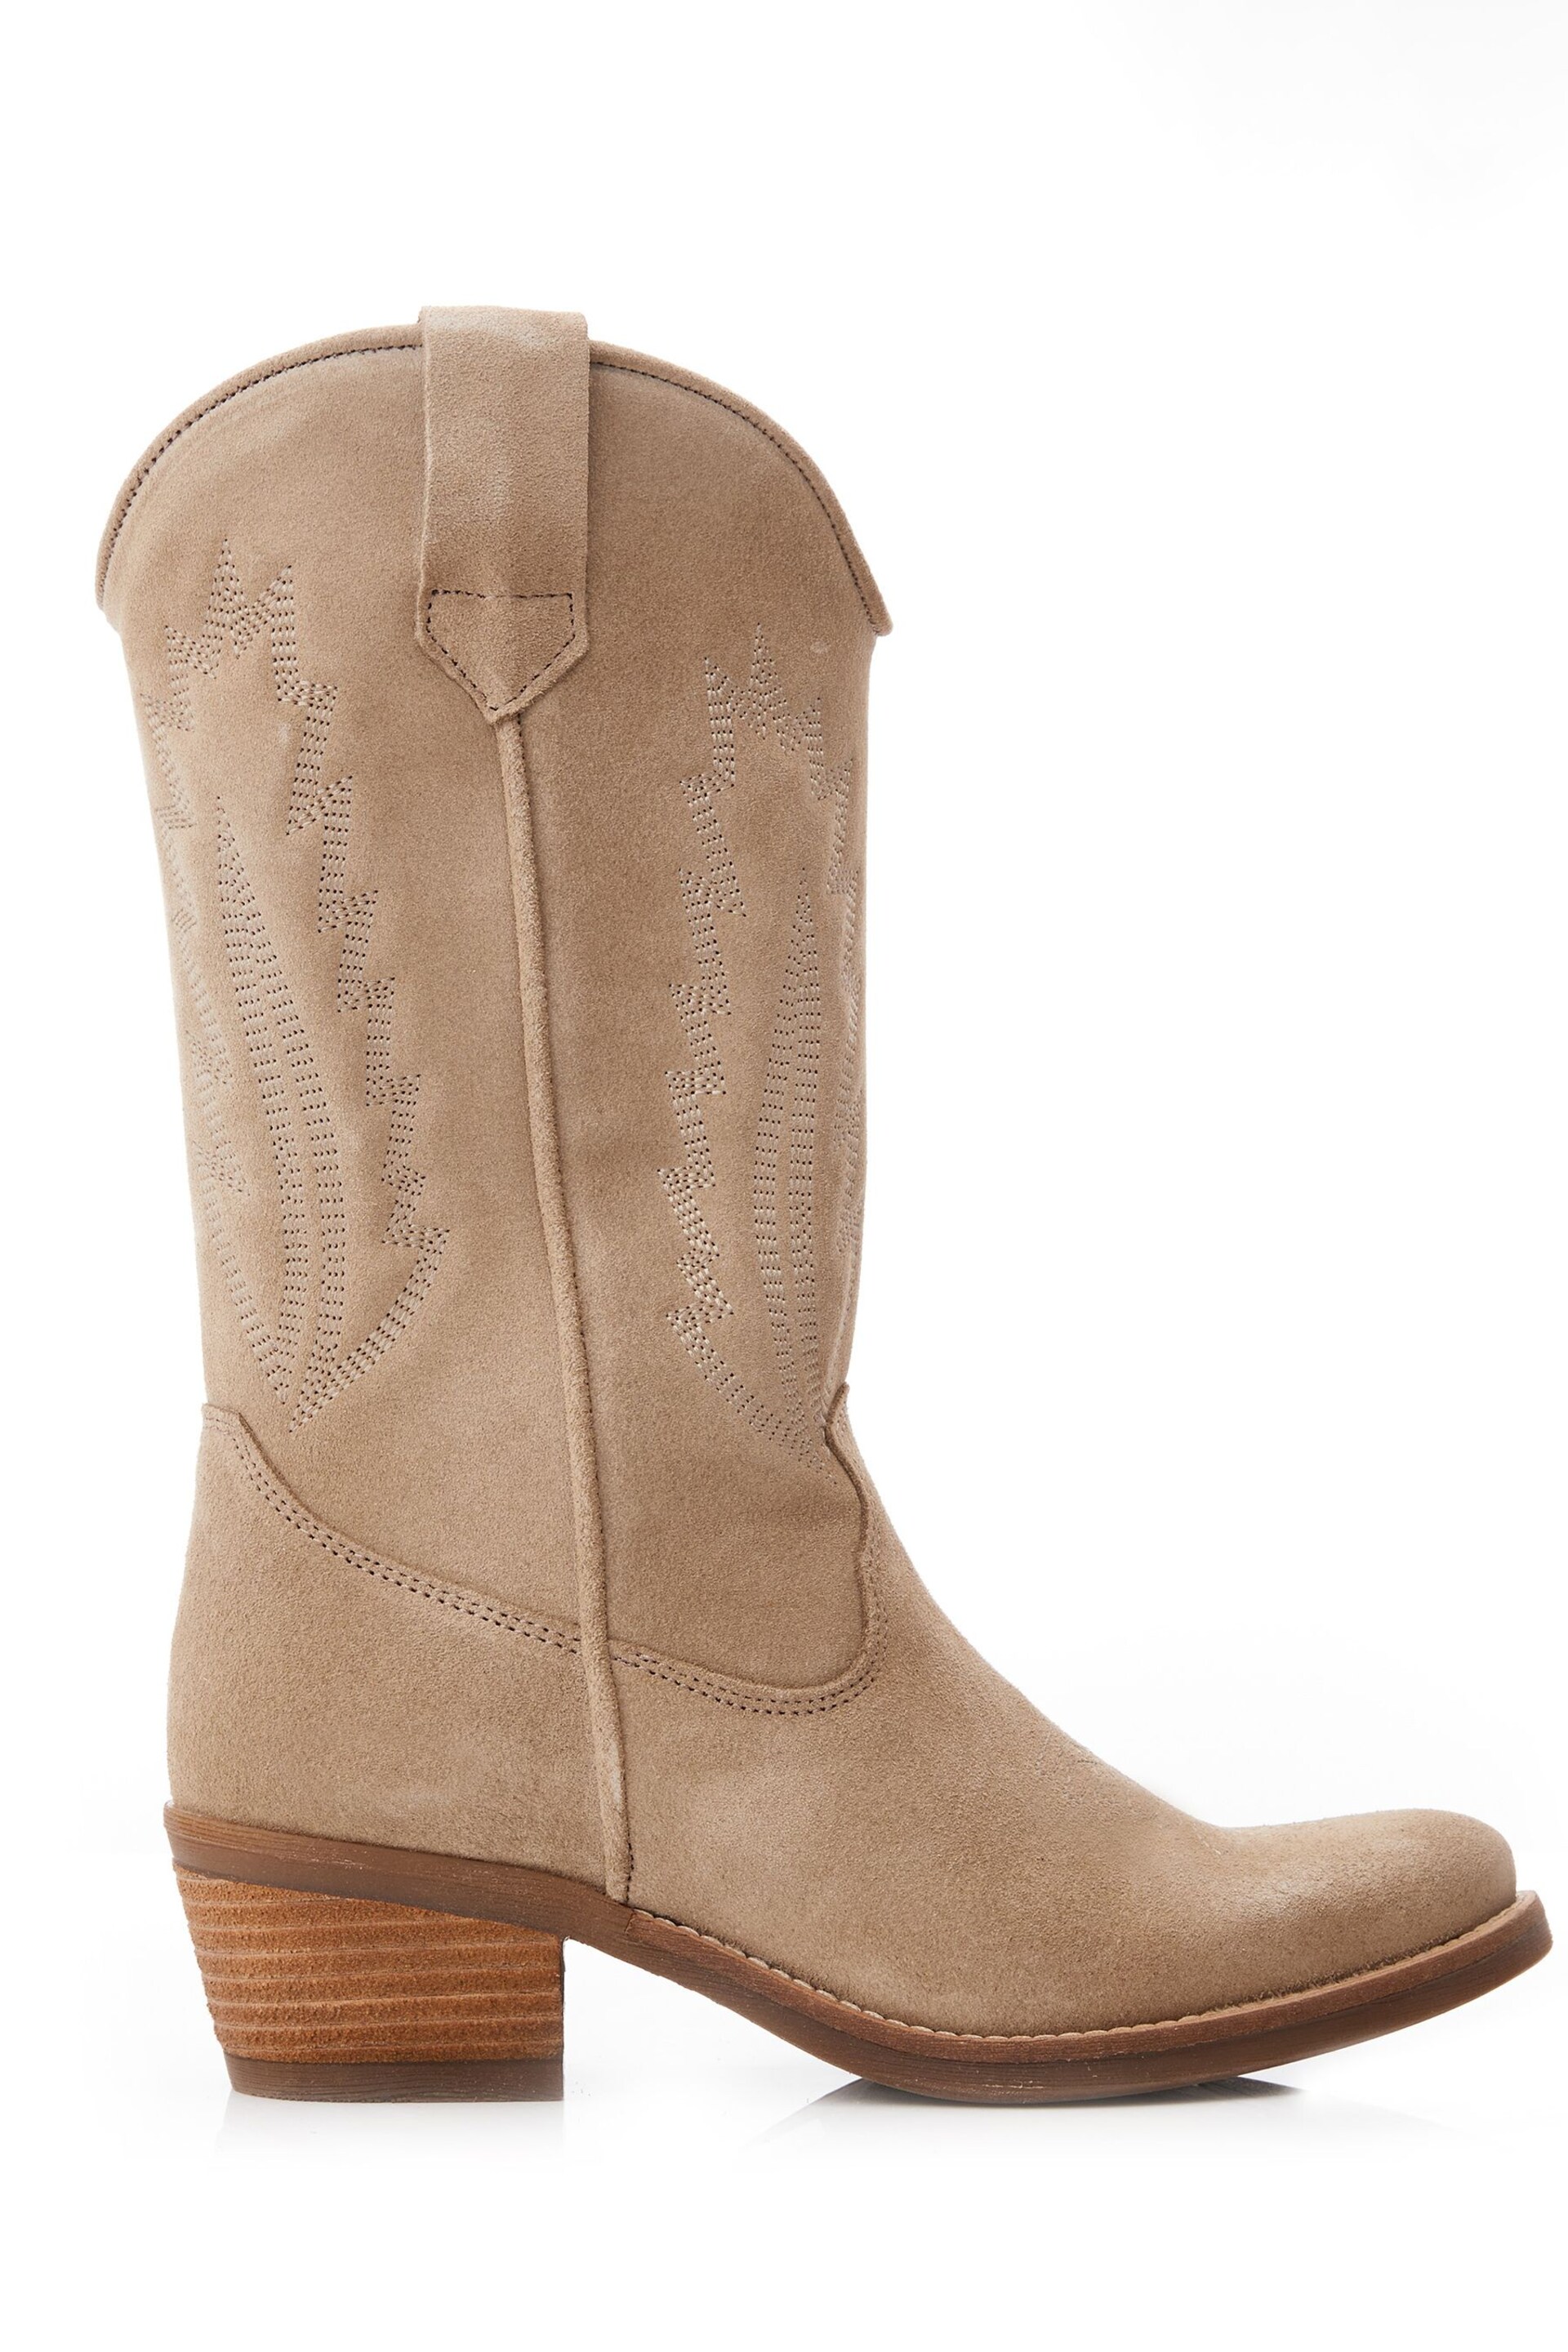 Moda in Pelle Fanntine Mid Leg Pointed Western Nude Boots - Image 1 of 4